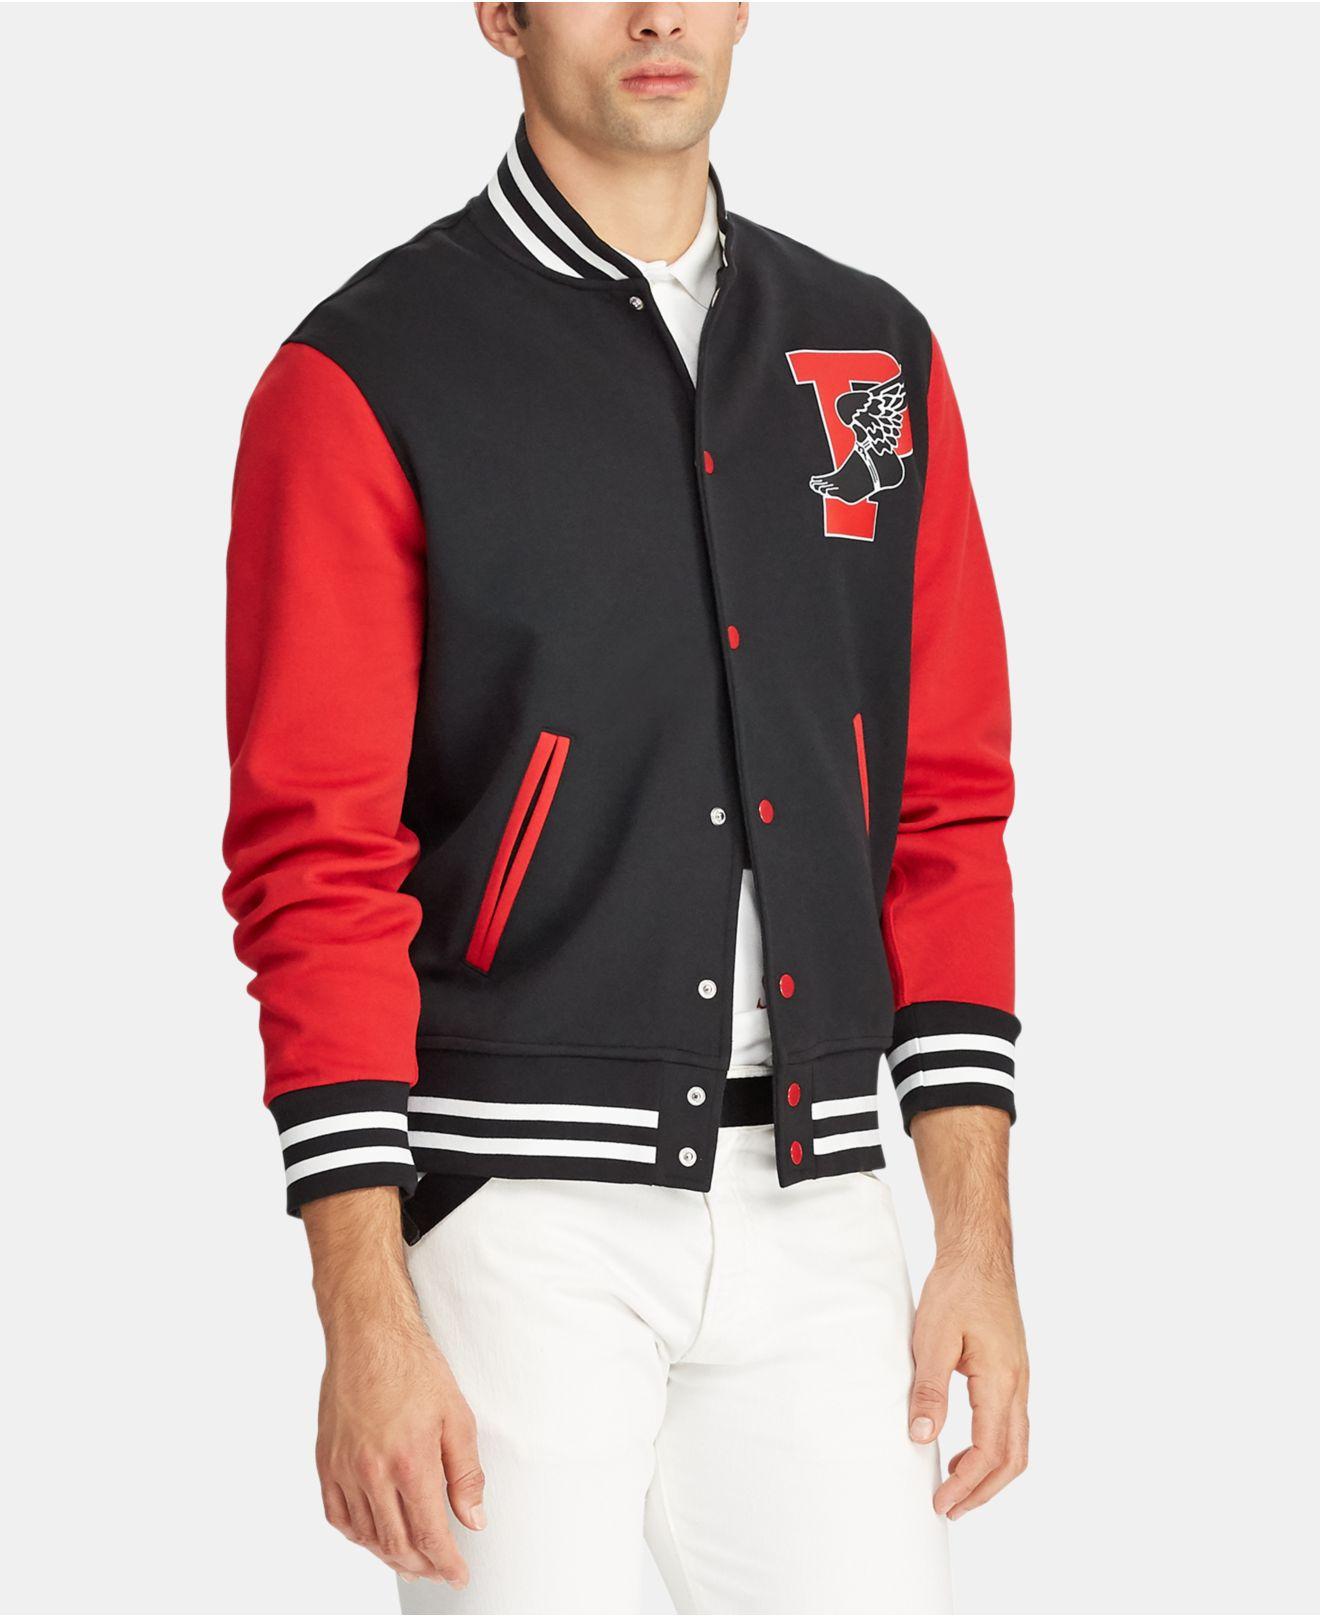 Polo Ralph Lauren P-wing Baseball Jacket in Red for Men - Lyst